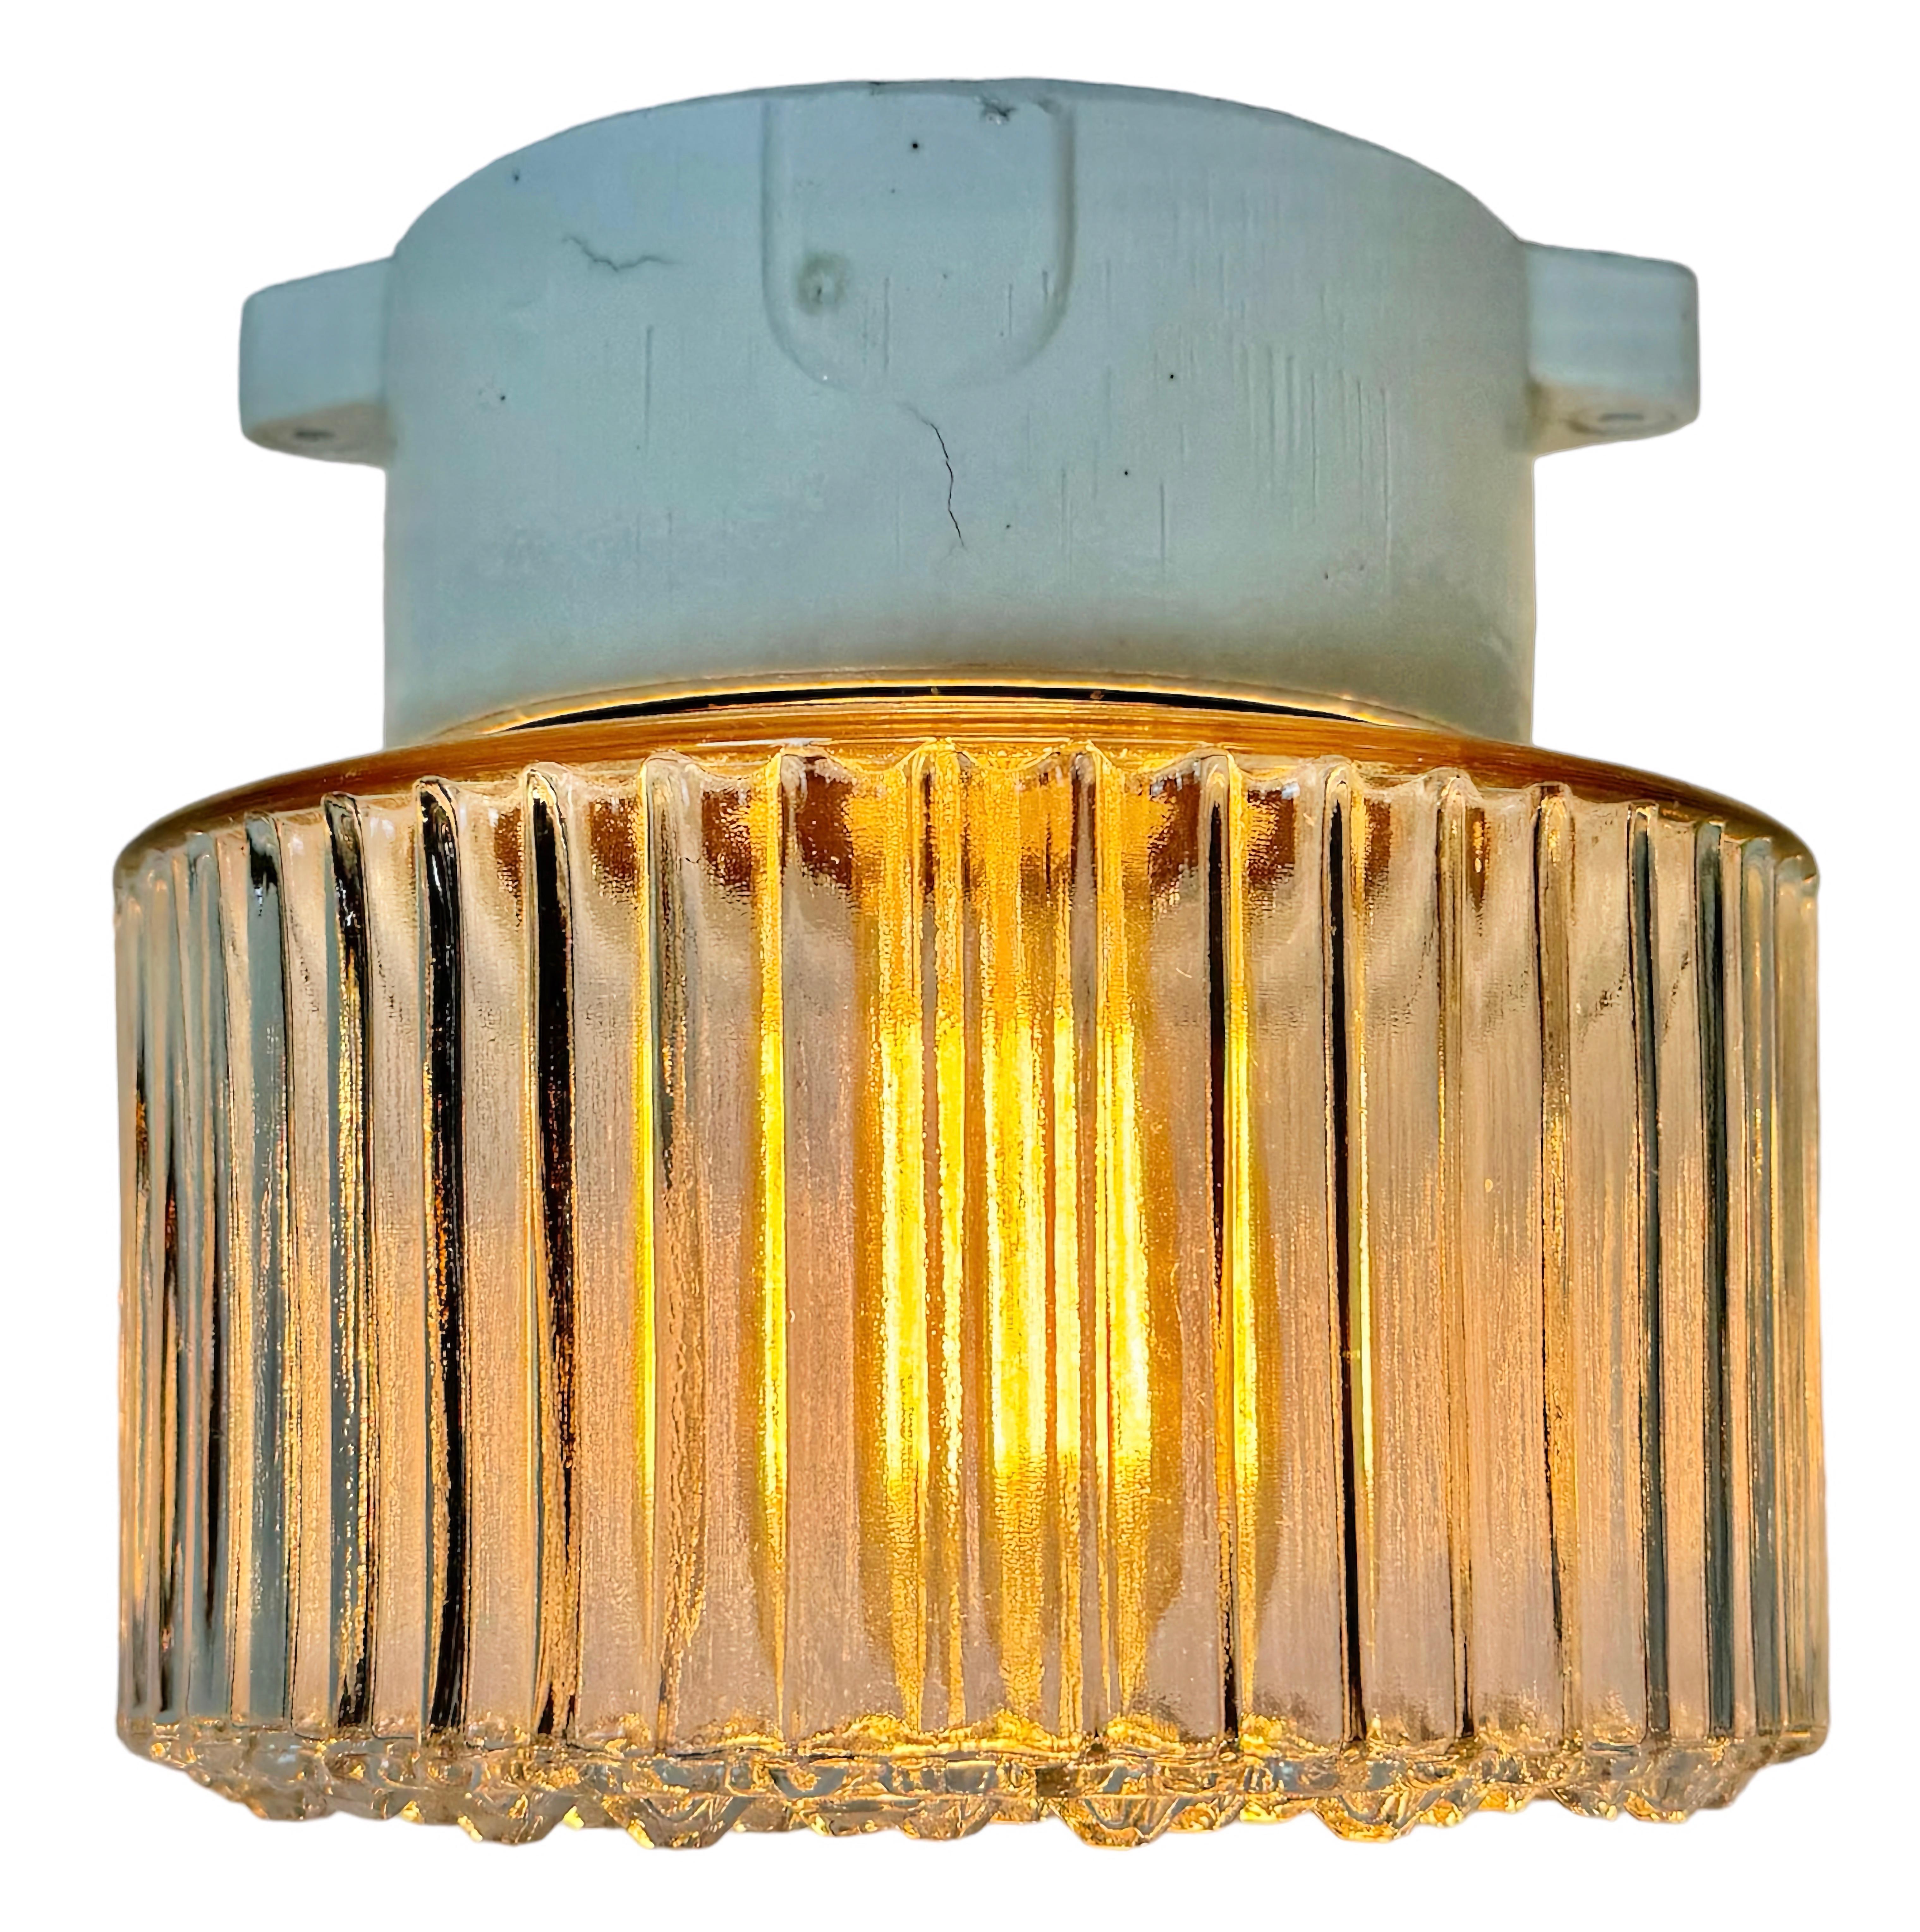 Vintage ceiling or wall light  made in East Germany during the 1970s. It features a white porcelain wall mounting and a glass cover. The socket requires E27/E 26 light bulbs. New wire. The weight of the lamp is 2,4 kg.
Dimensions: 
Diameter of the